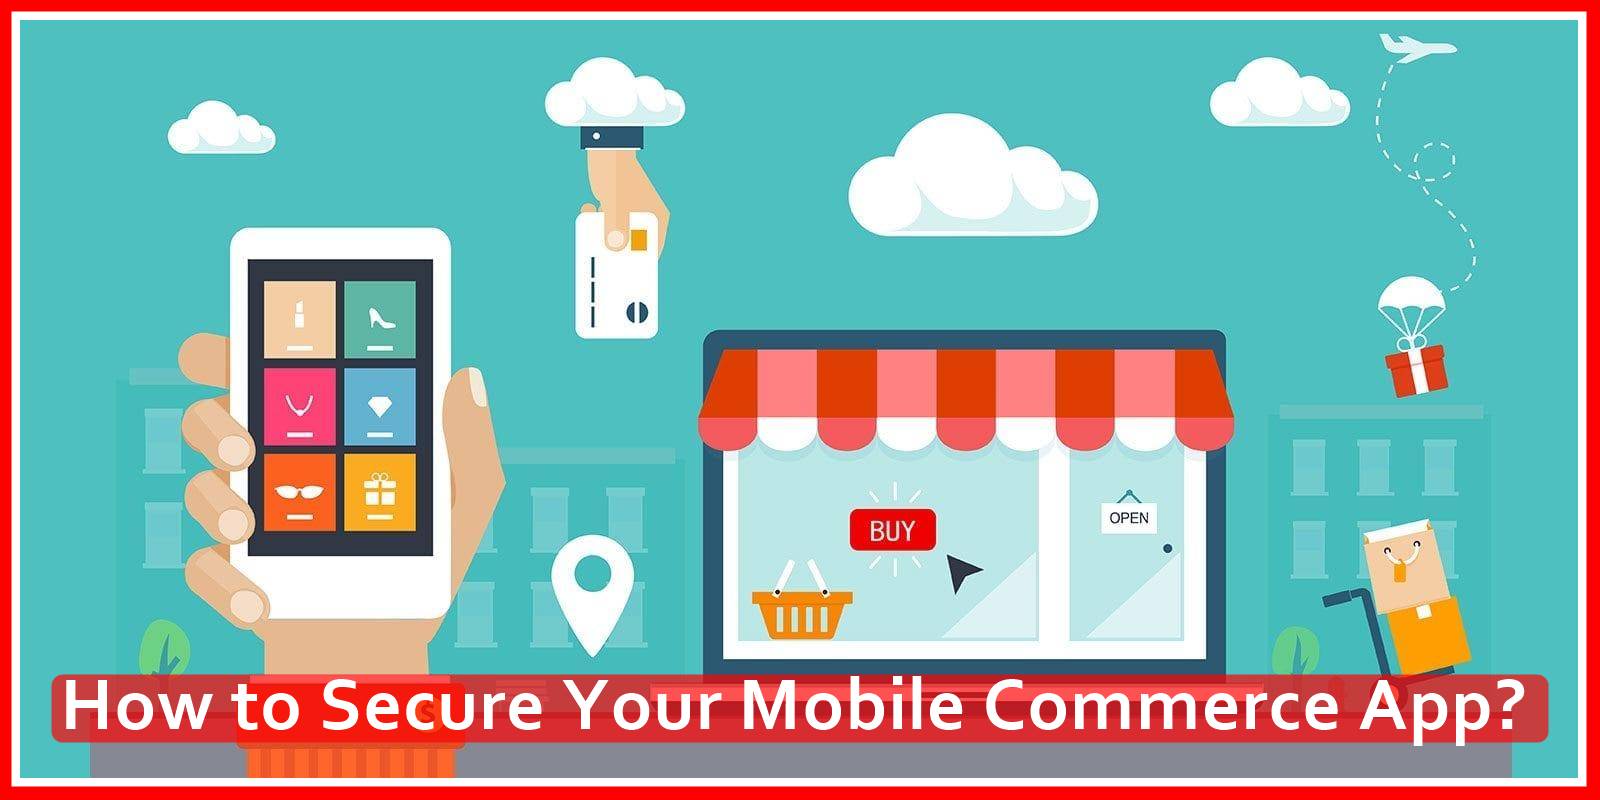 How to Secure Your Mobile Commerce App?